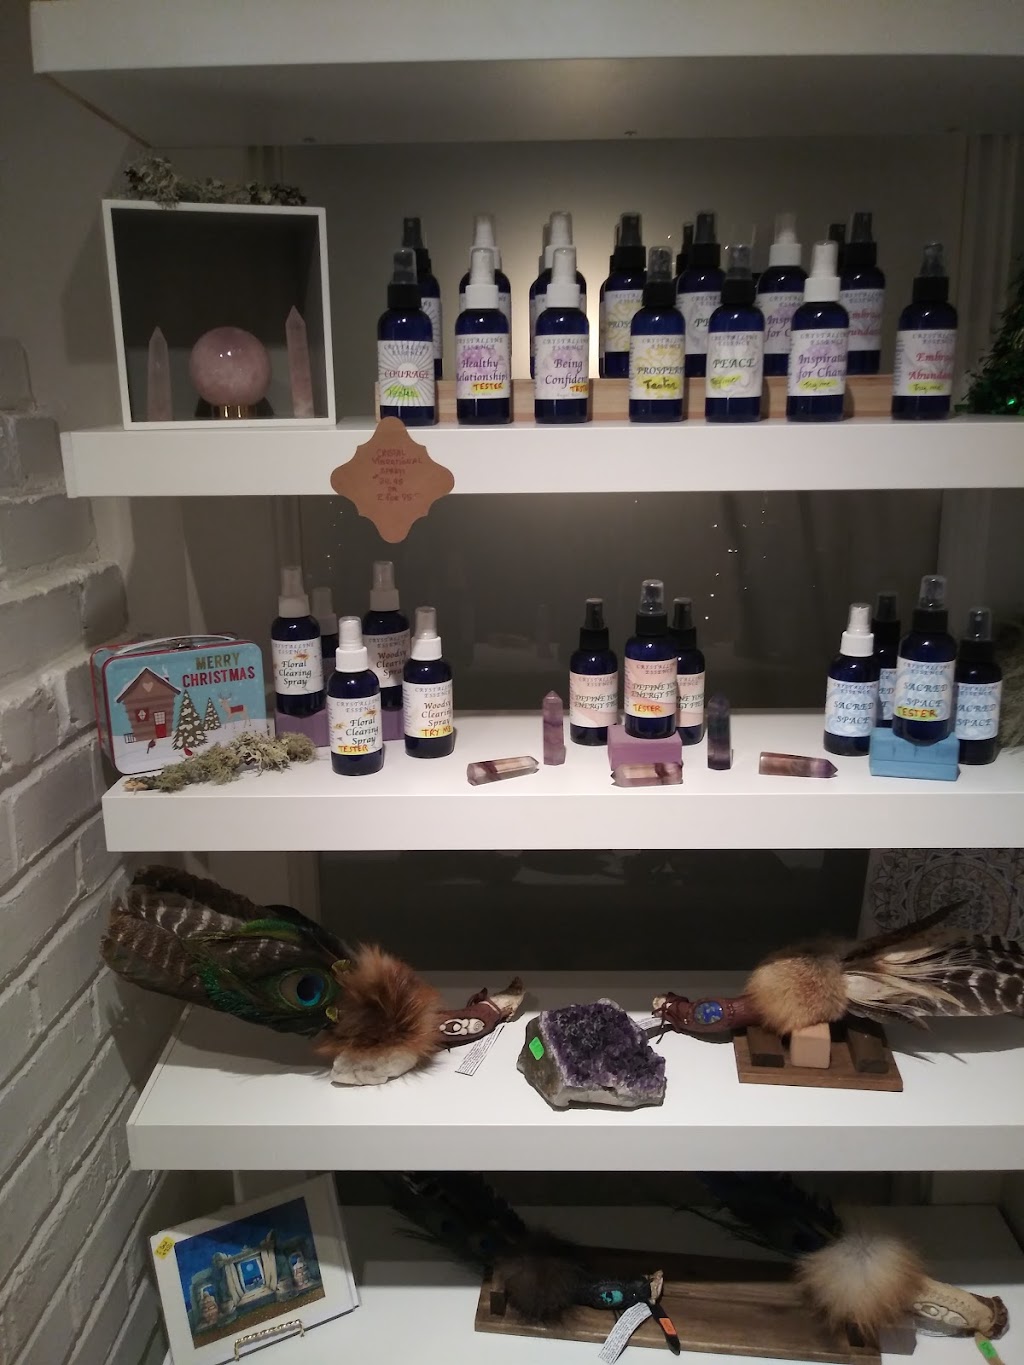 Sonoma Healing Boutique Crystals & Jewelry | 10 Waterman Ave, Sonoma, CA 95476 | Phone: (707) 309-1393